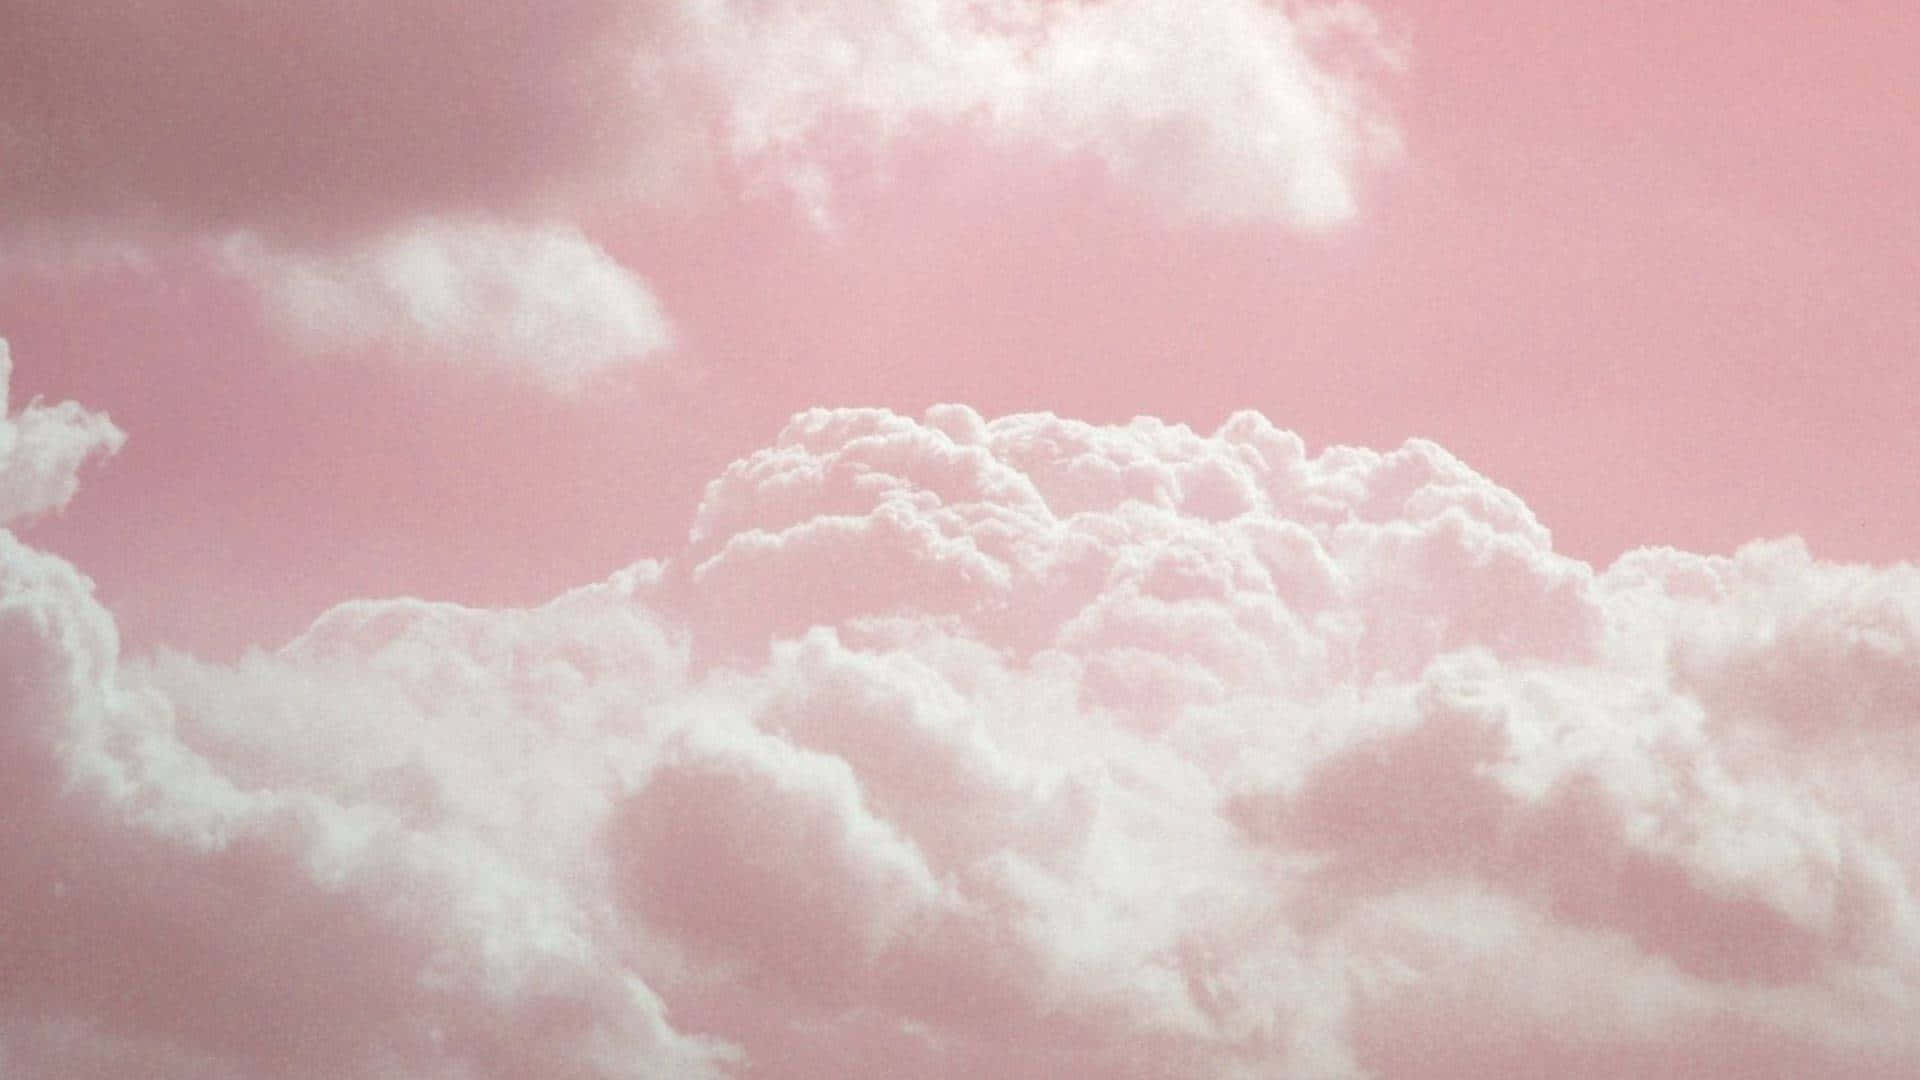 Cloudscape Photography With Filter Effects Desktop Pink Aesthetic Wallpaper